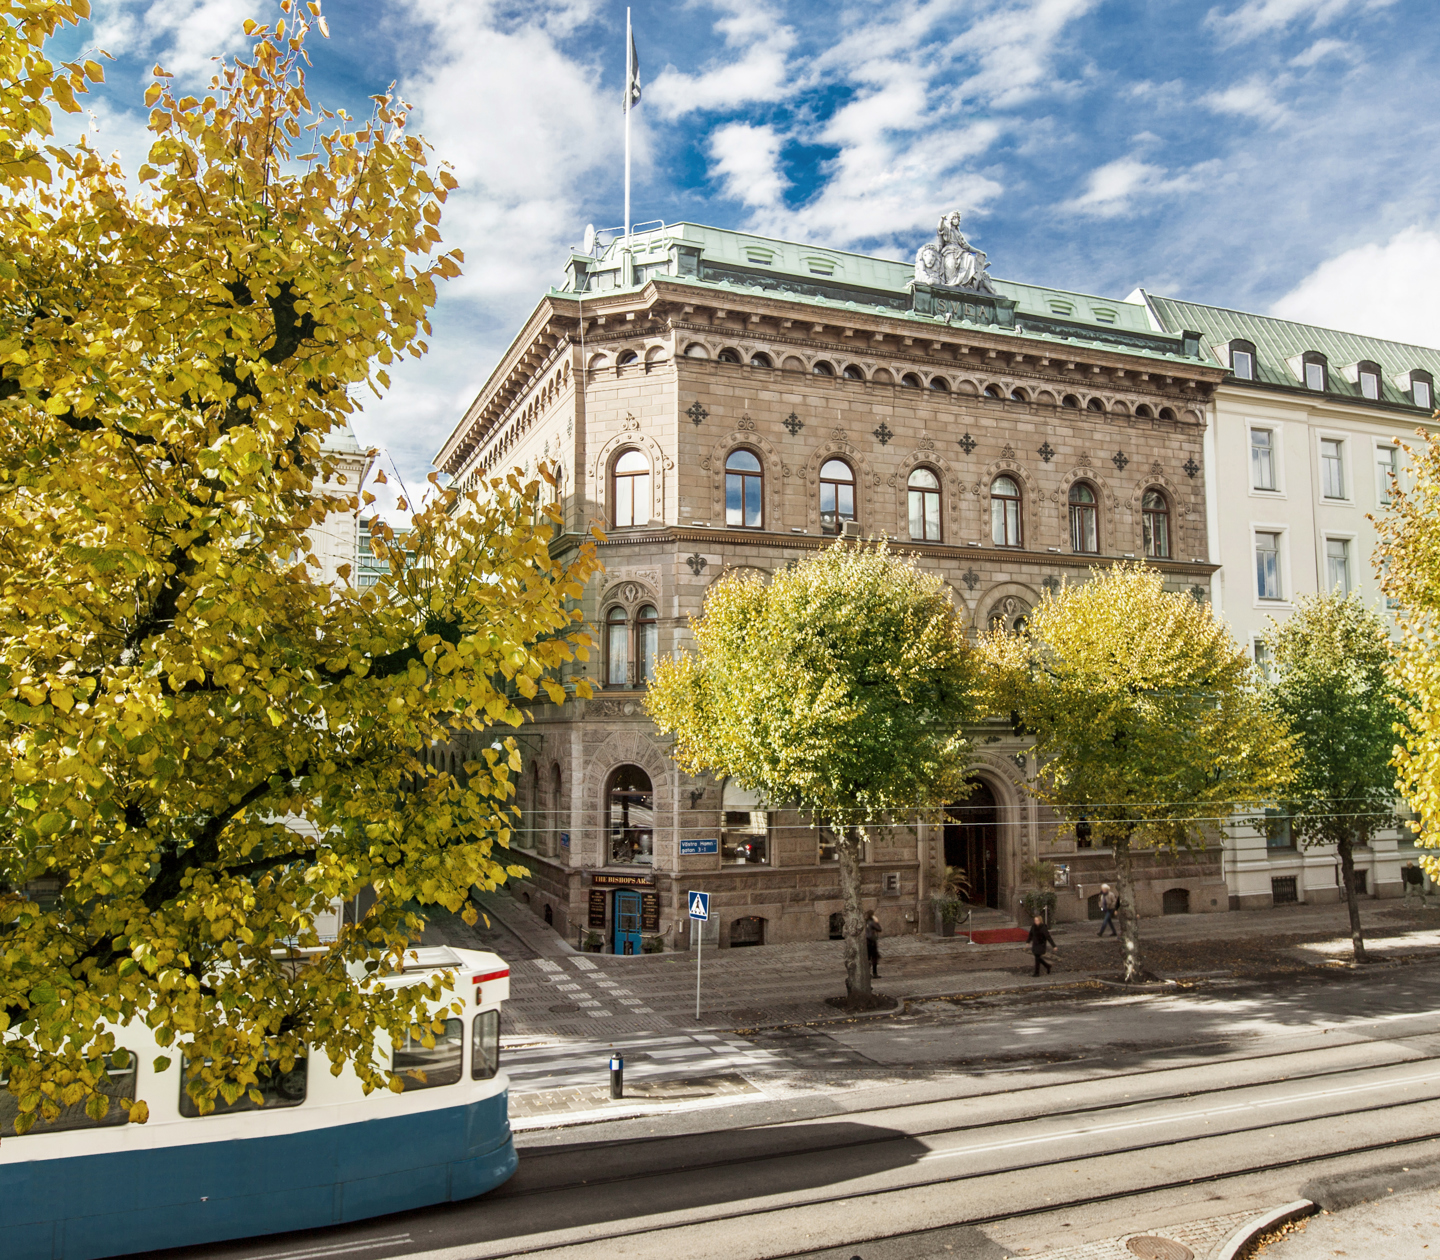 Nice facade of Elite Plaza Hotel in Gothenburg with trees and tram in front